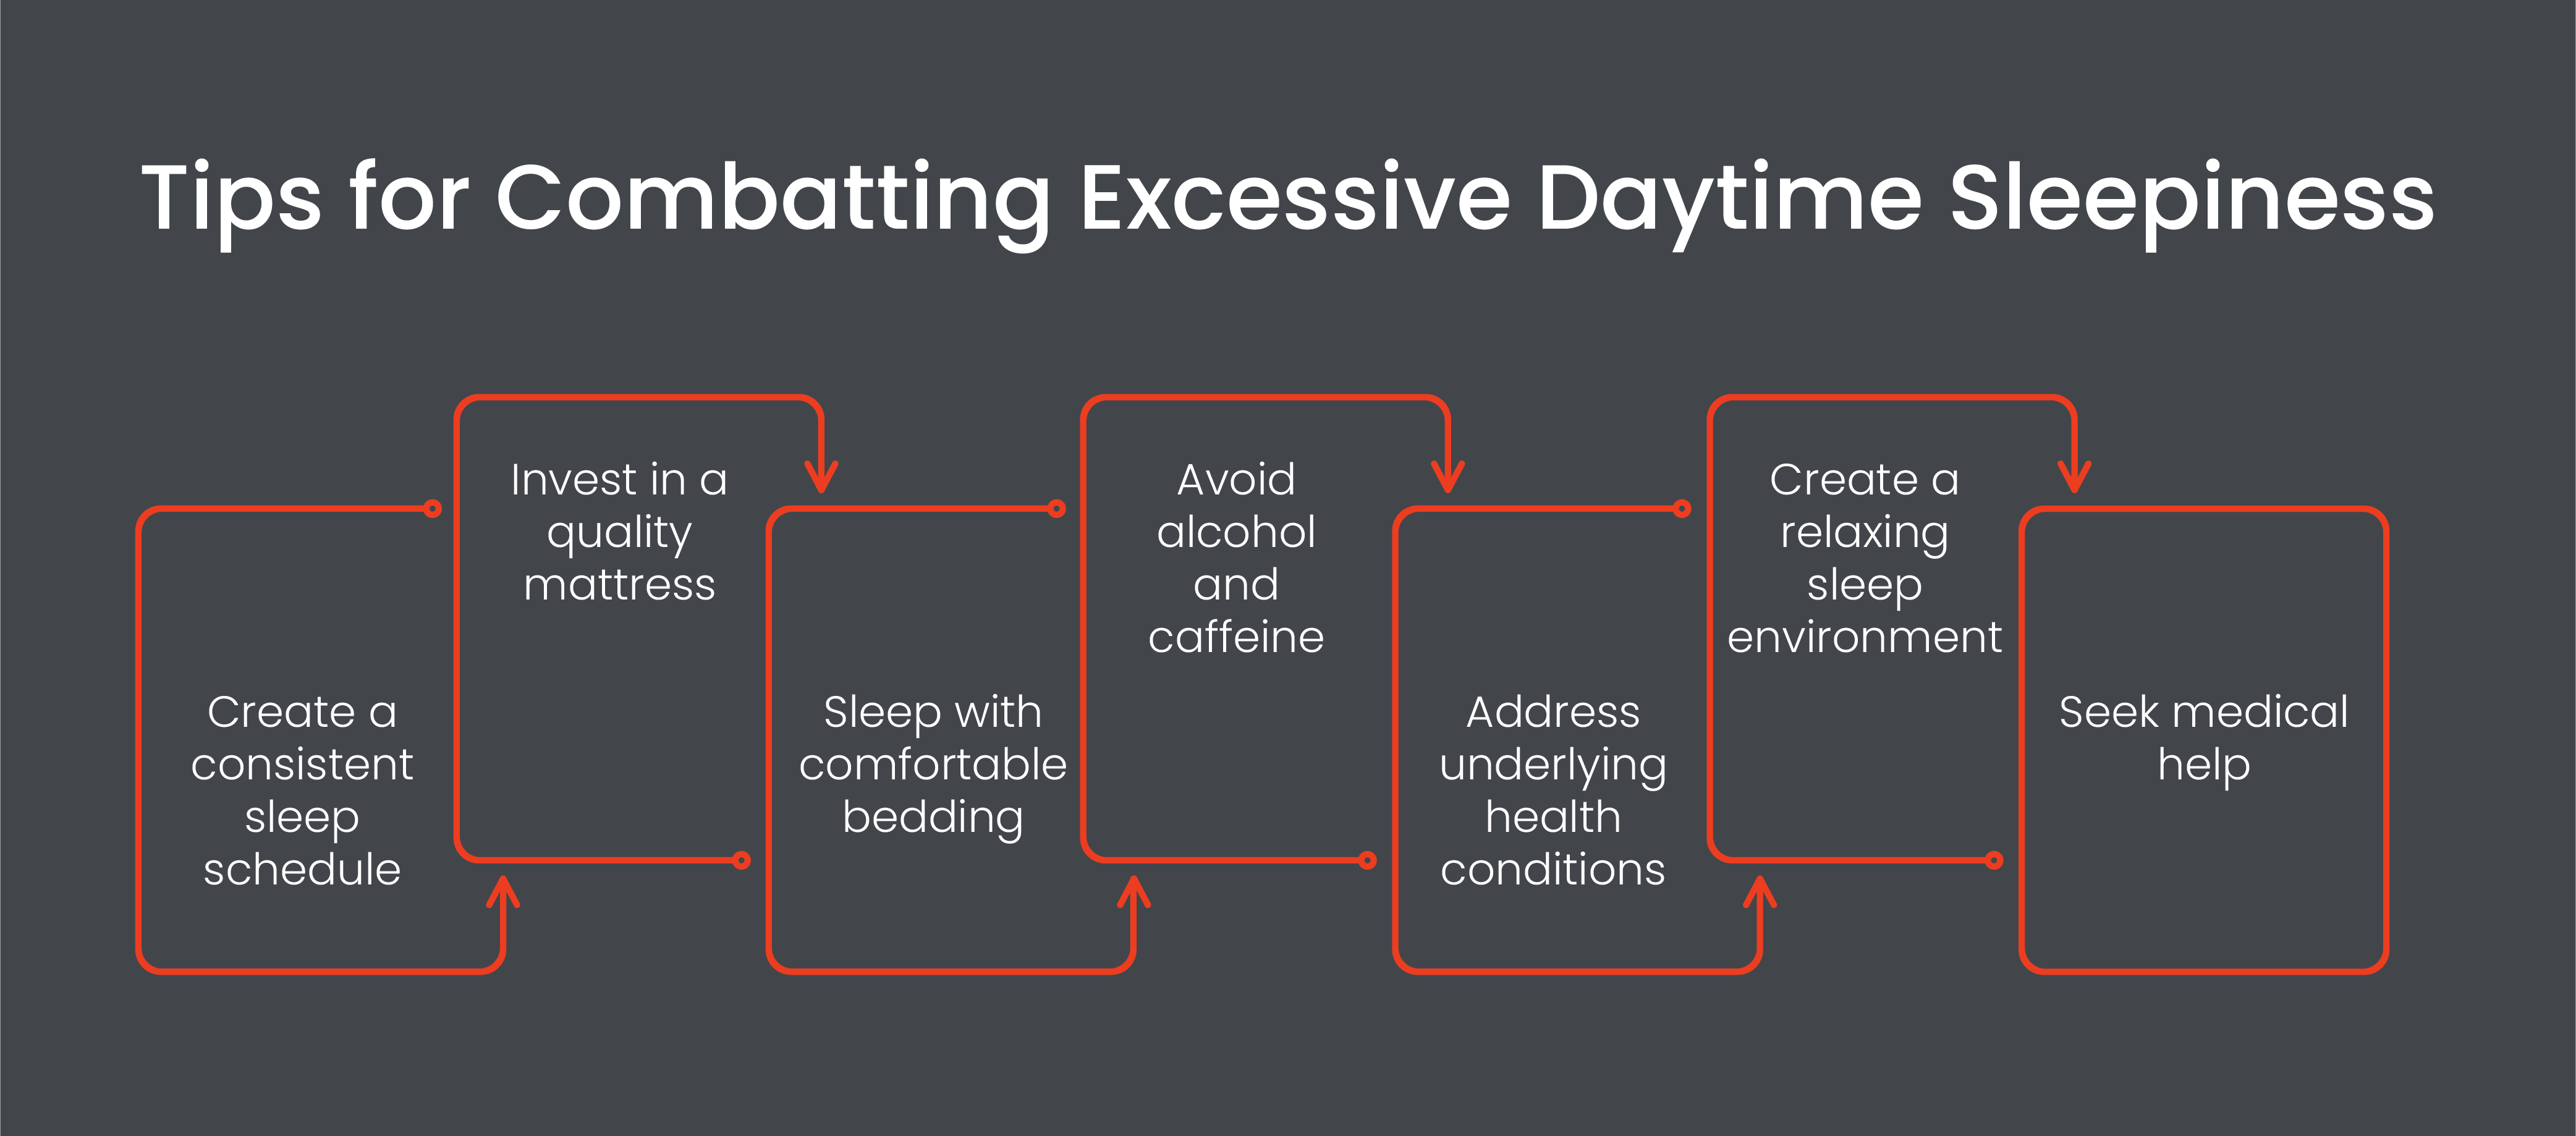 Tips for combatting excessive daytime sleepiness